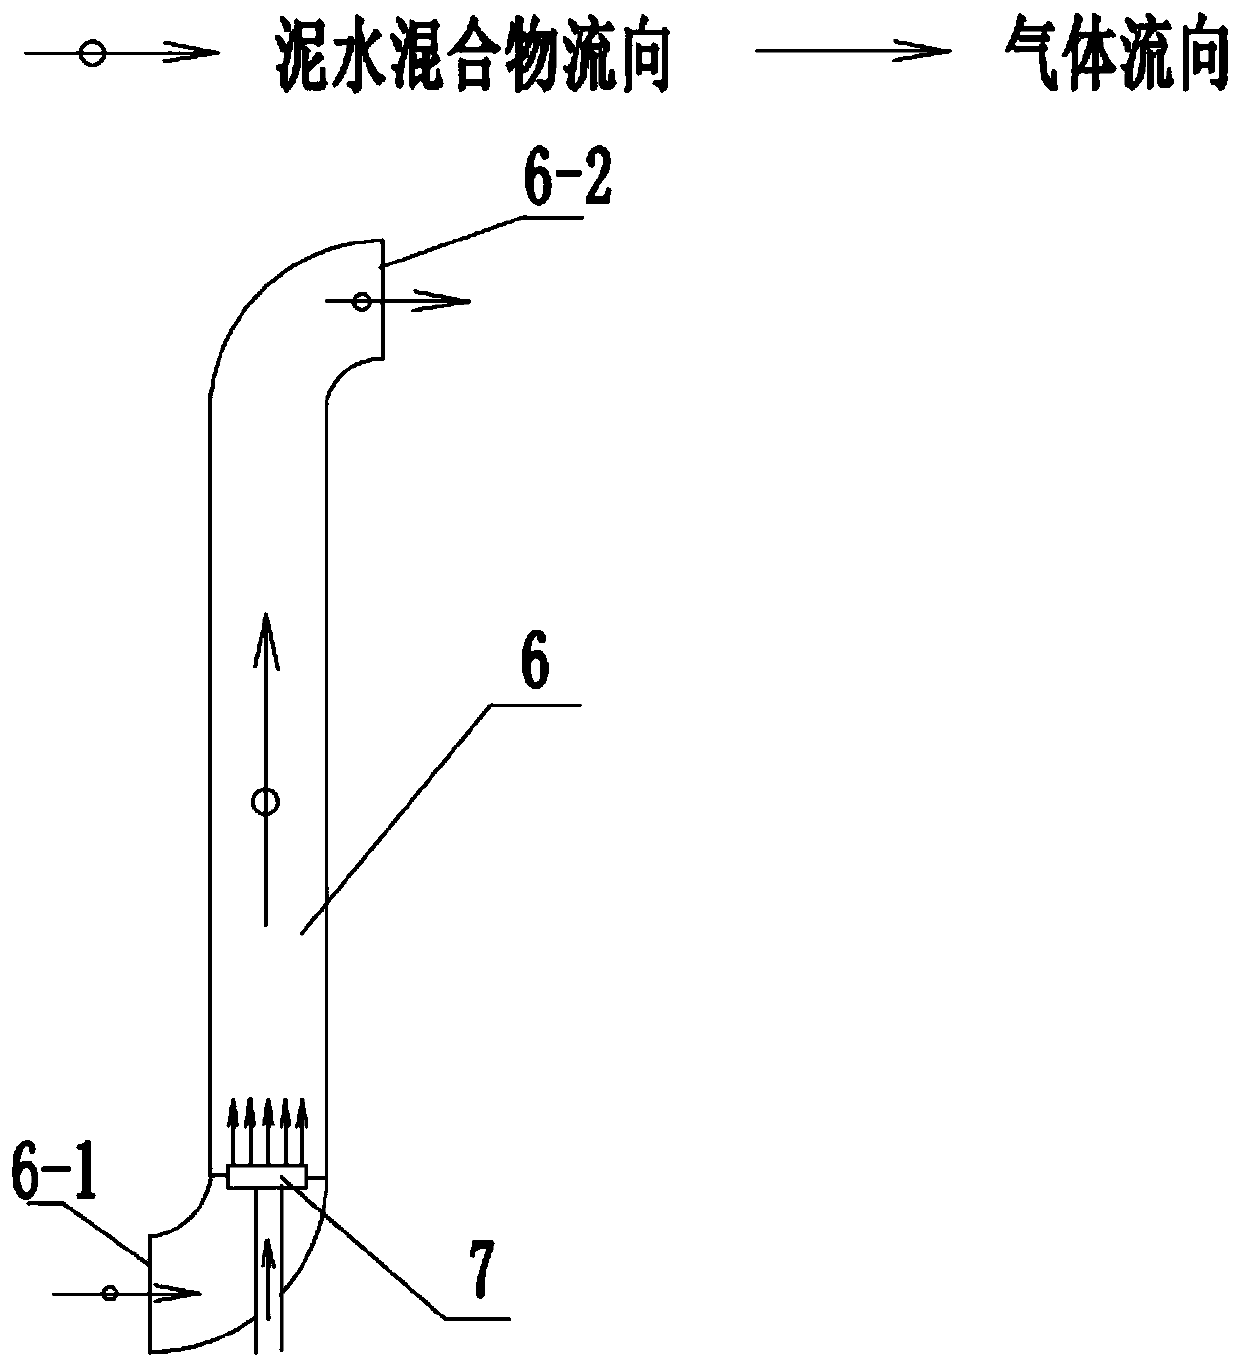 Small-flux gas supply circular stirring anaerobic reaction method and reactor